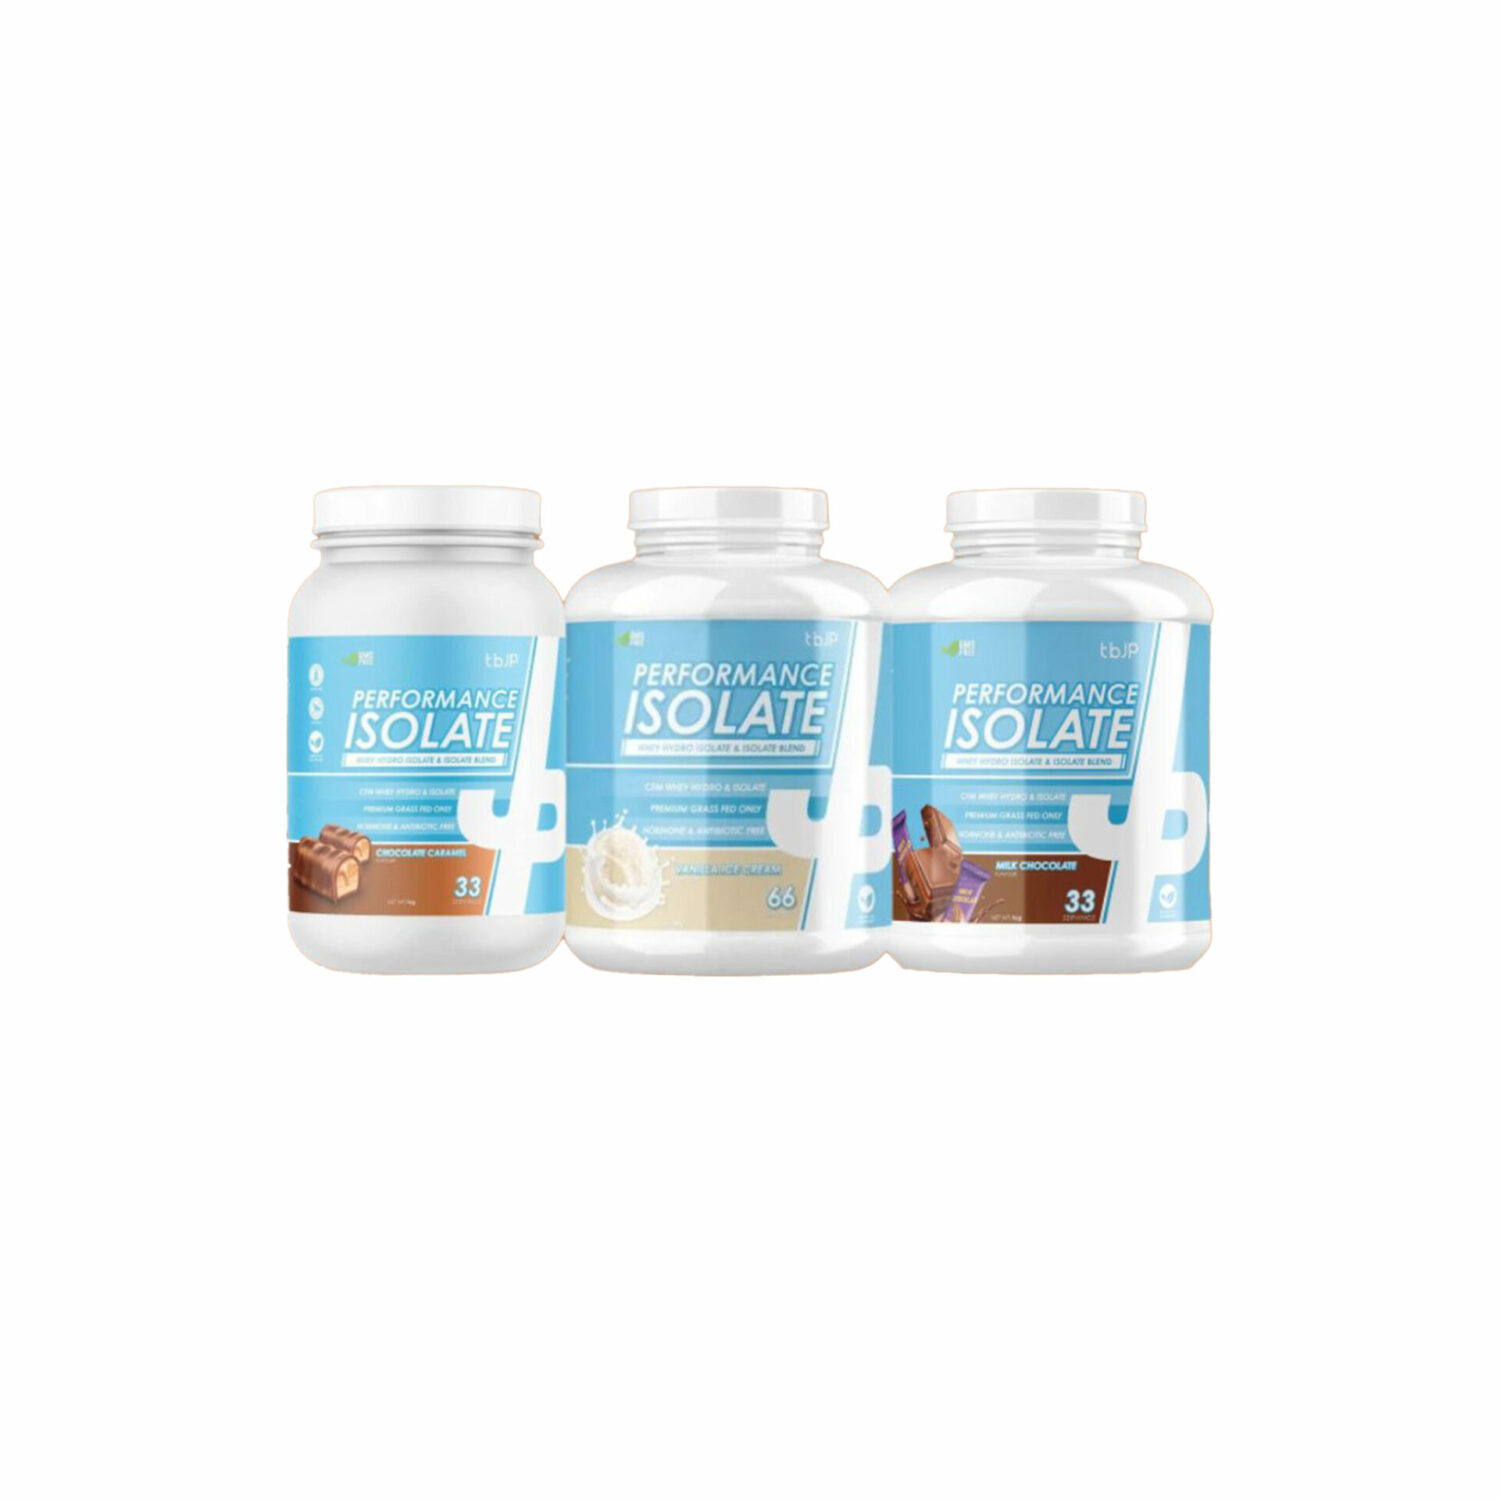 TBJP Protein - Performance Isolate Package Deal (3x)